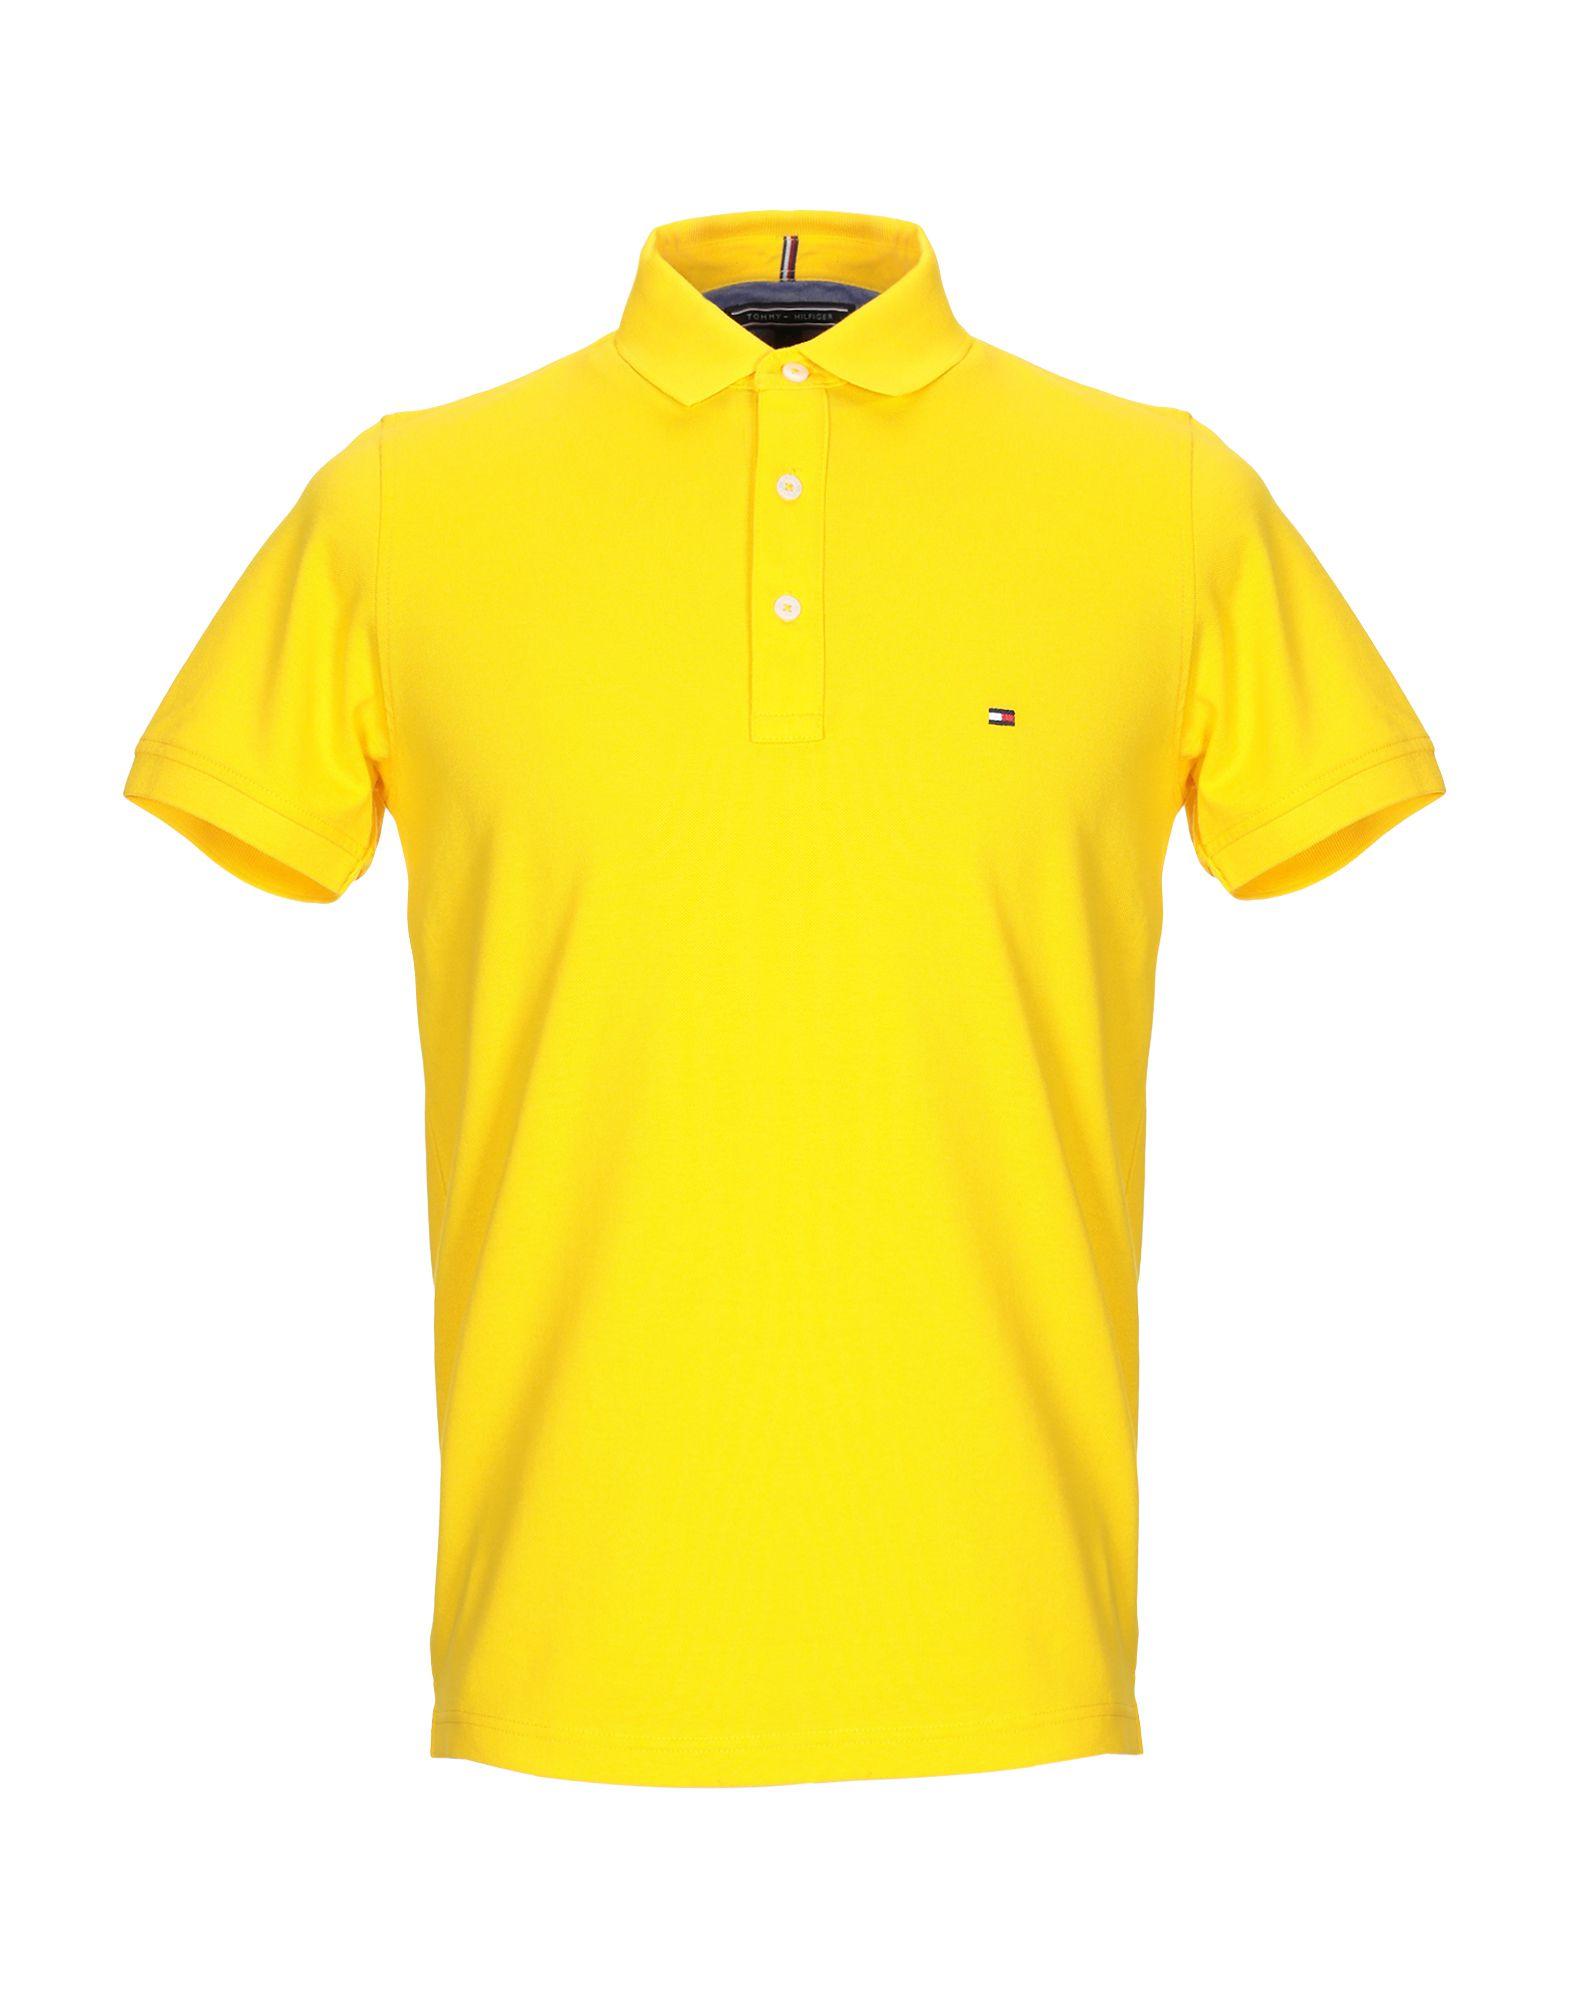 Tommy Hilfiger Cotton Polo Shirt in Yellow for Men - Lyst